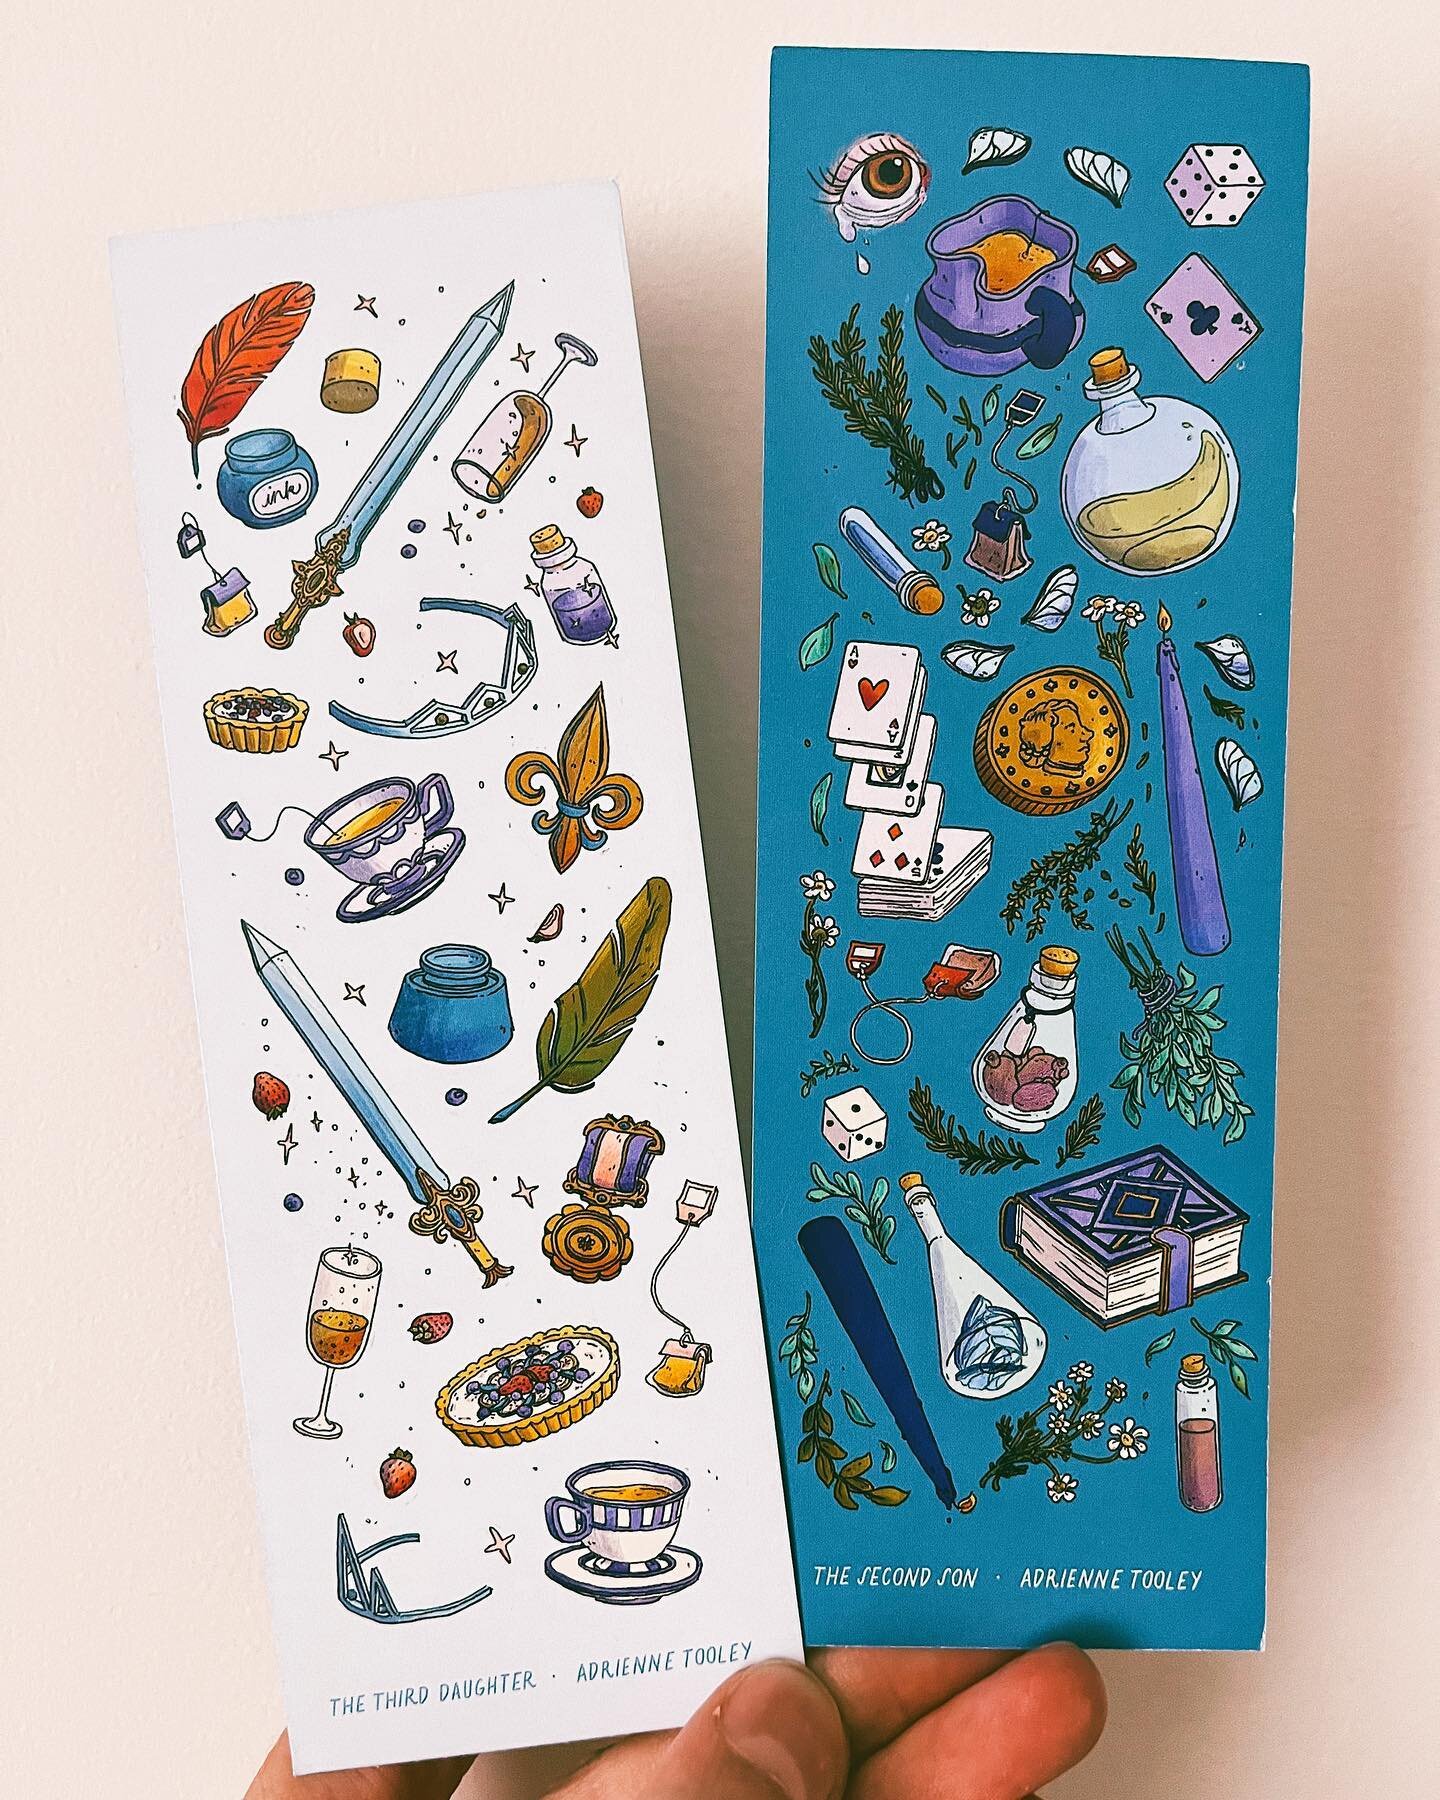 in honor of two months until the third daughter (!!!), I offer you all a glimpse of the first of my preorder campaign incentives: this stunning, two sided bookmark&mdash;one side each for Elodie (left) and Sabine (right).

if this aesthetic feels fam